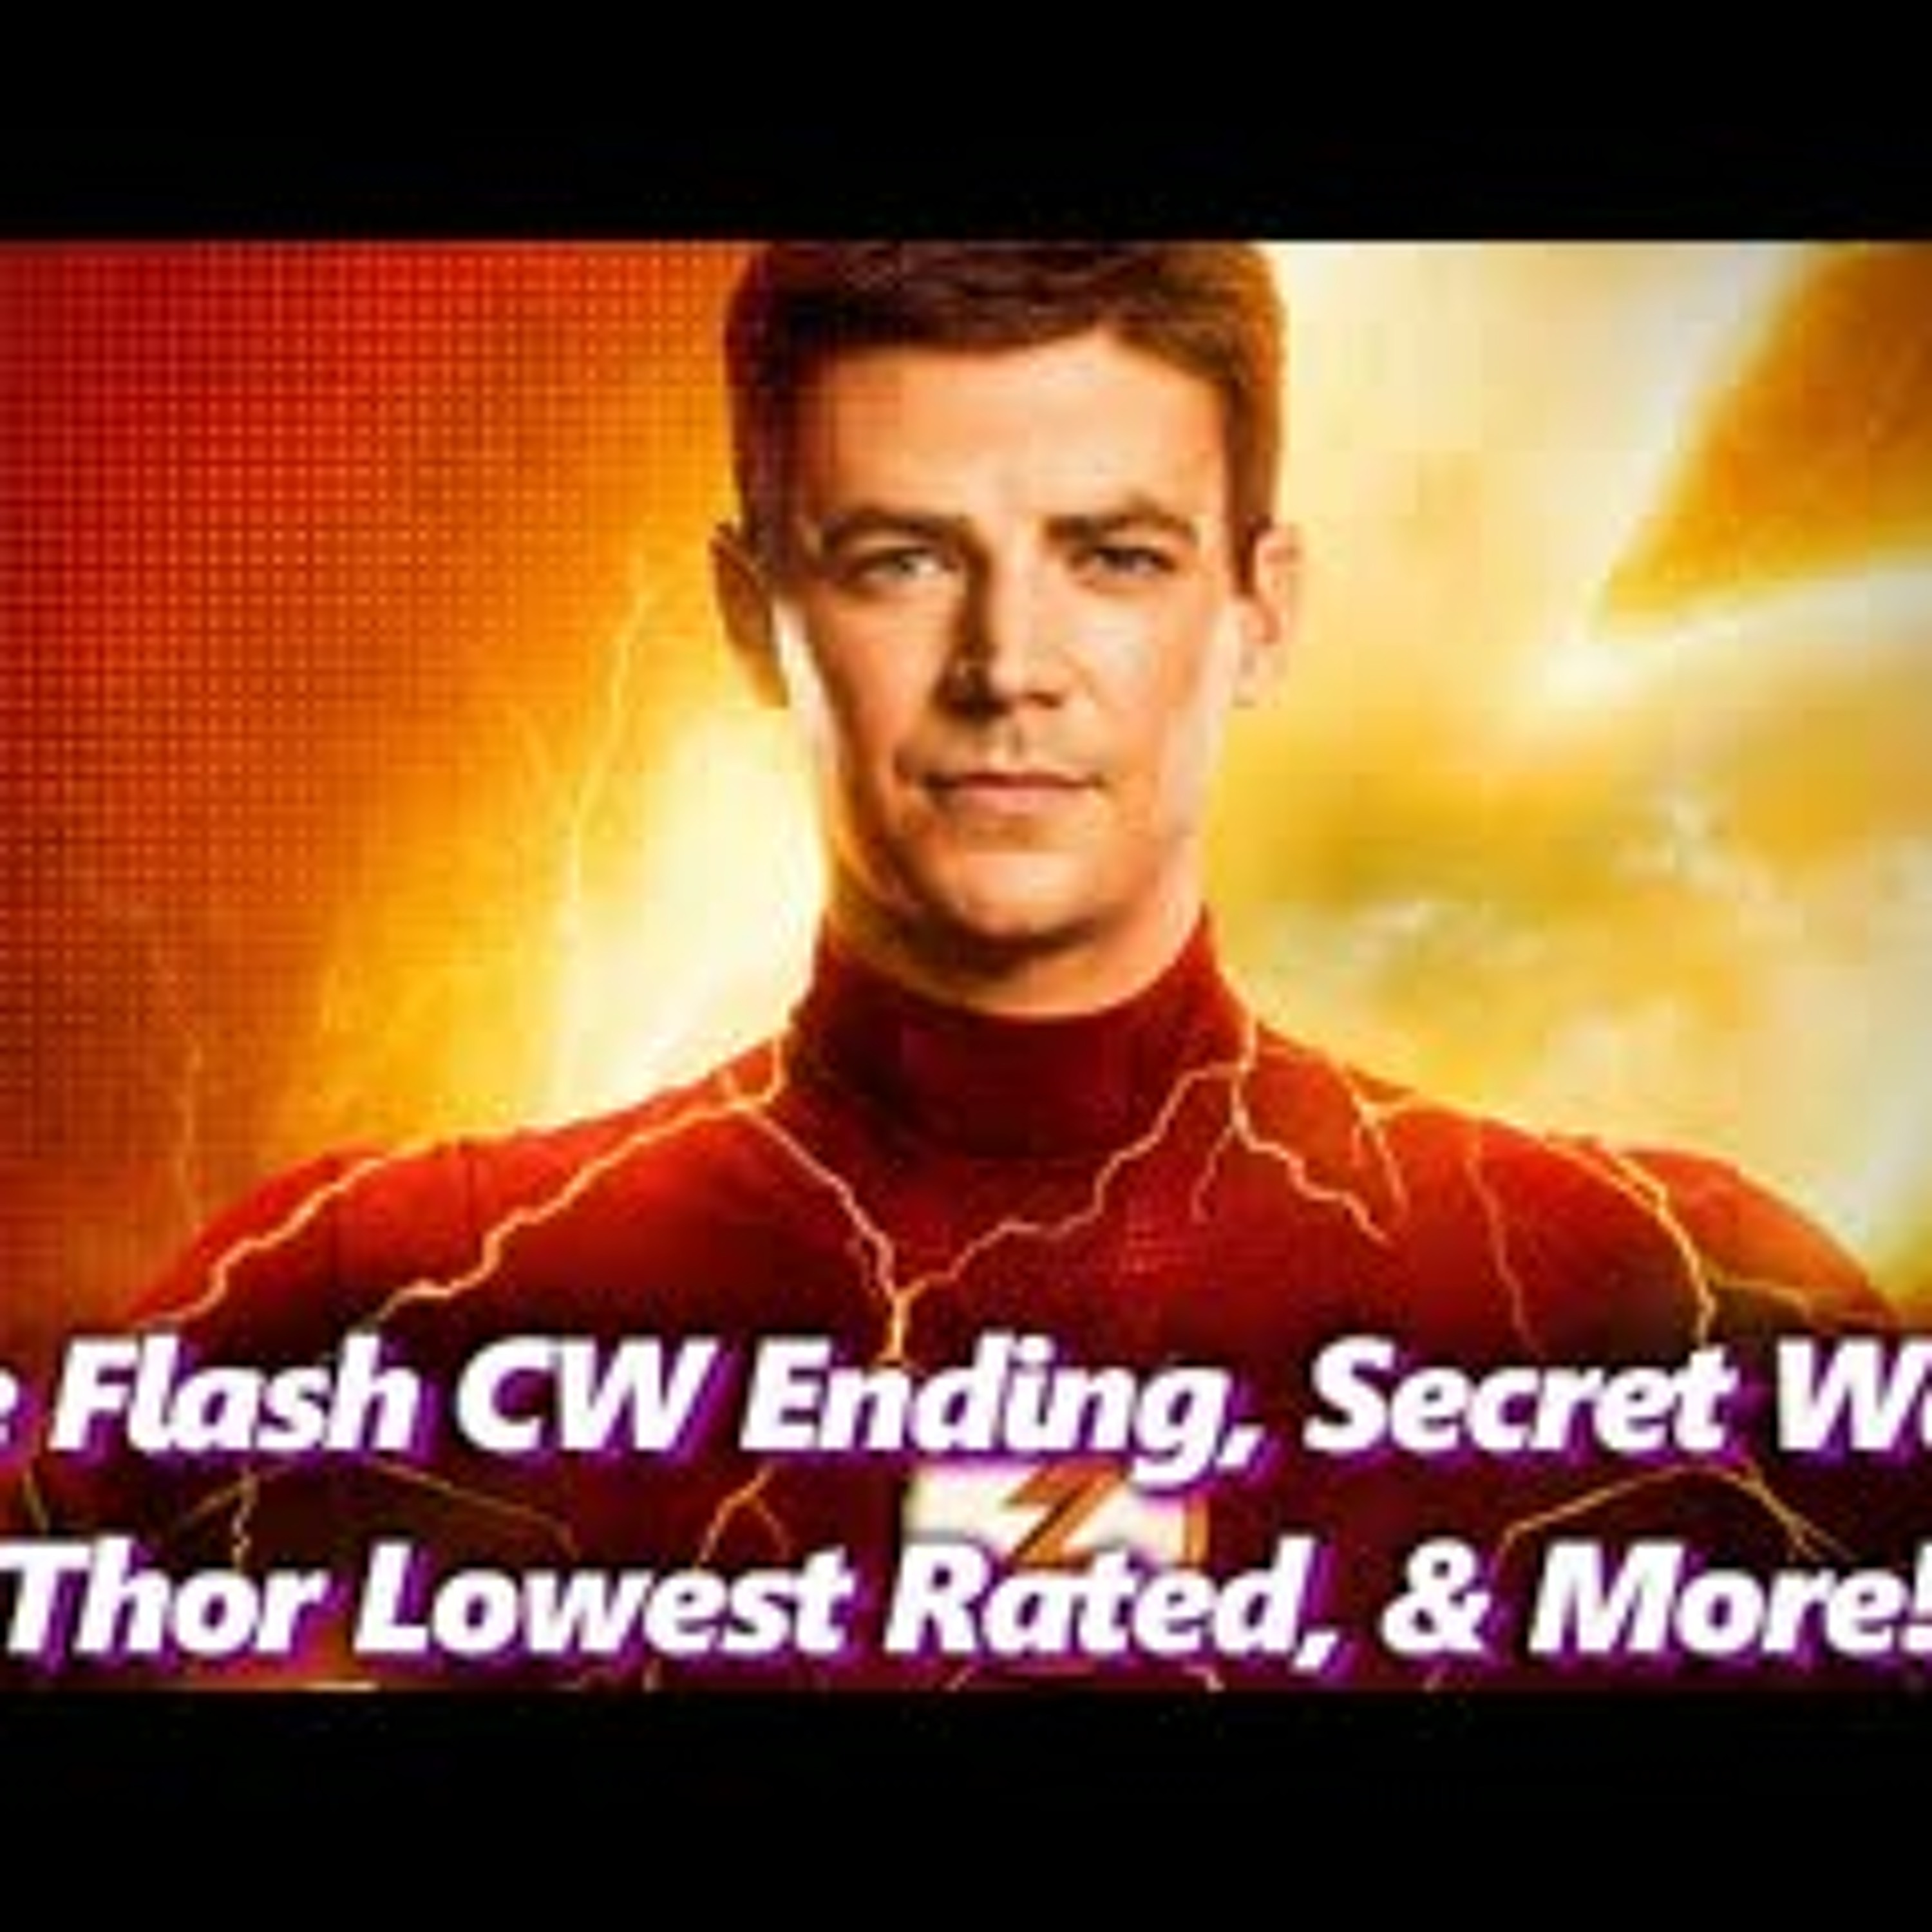 Flash CW Ending, Secret Wars & Thor Bombed On Reviews! - Absolute Comics